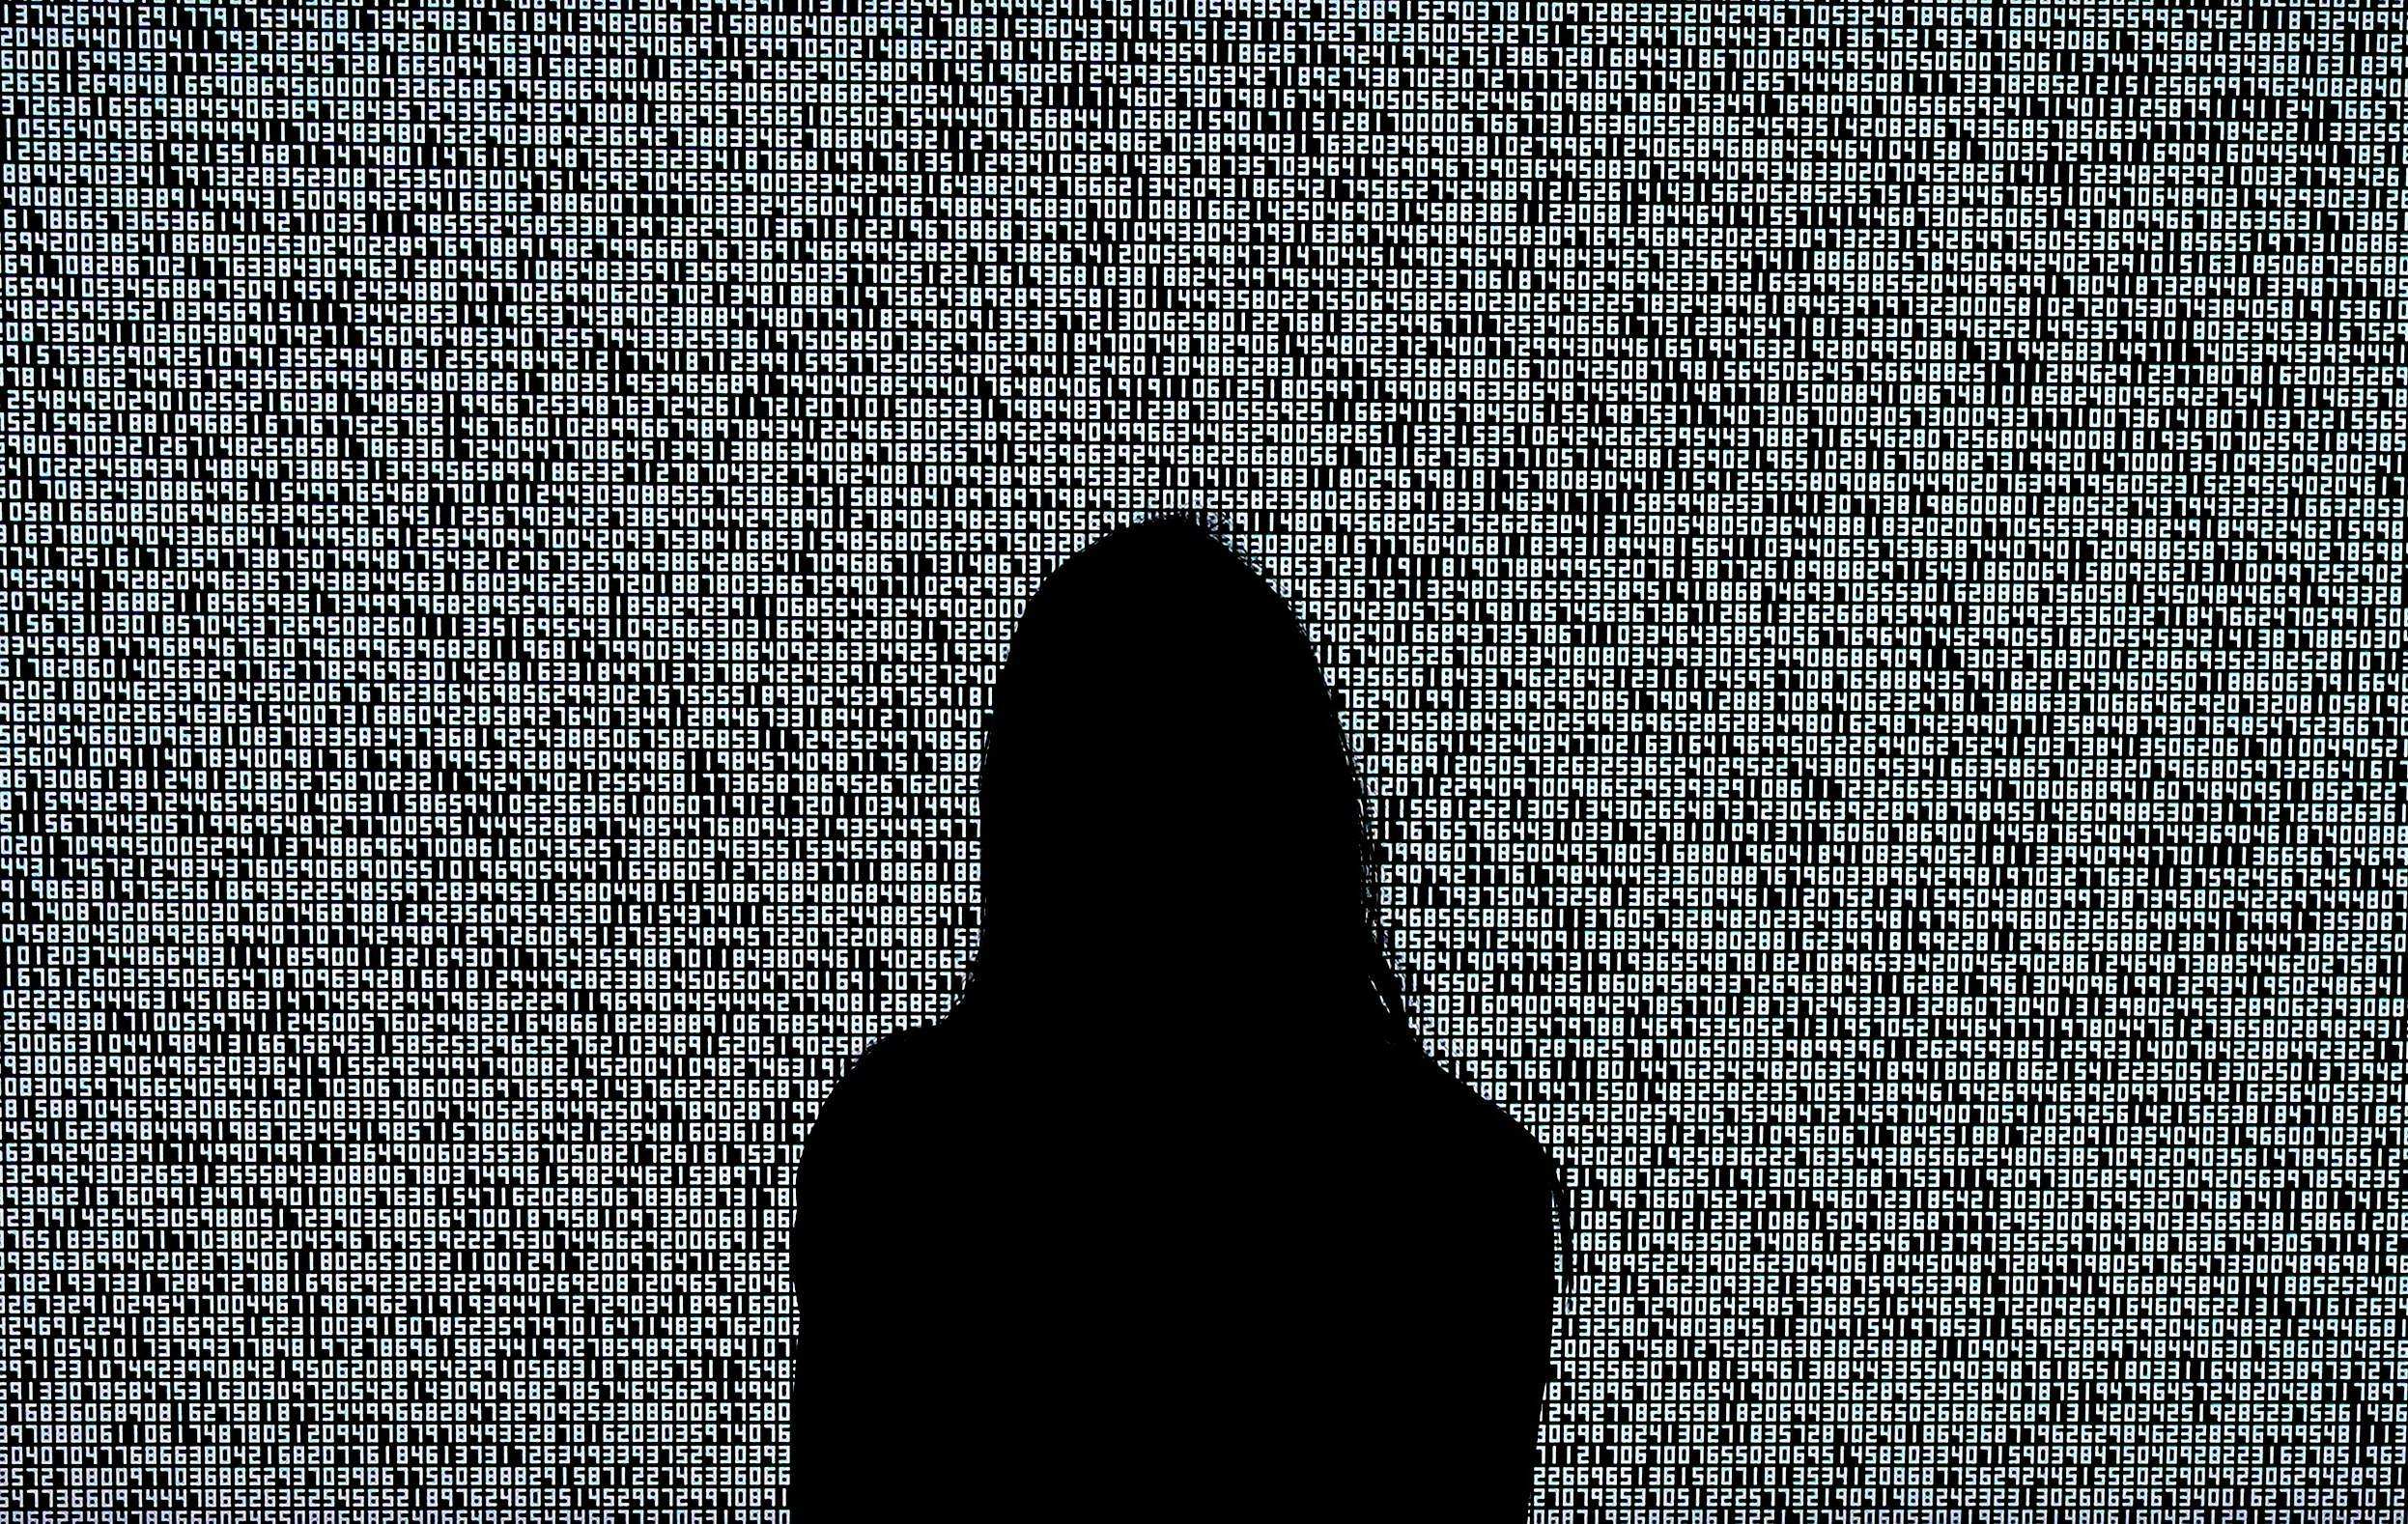 A woman looks at a NFT by Ryoji Ikeda titled “A Single Number That Has 10,000,086 Digits” on June 4, 2021, at Sotheby’s. Photo: AFP